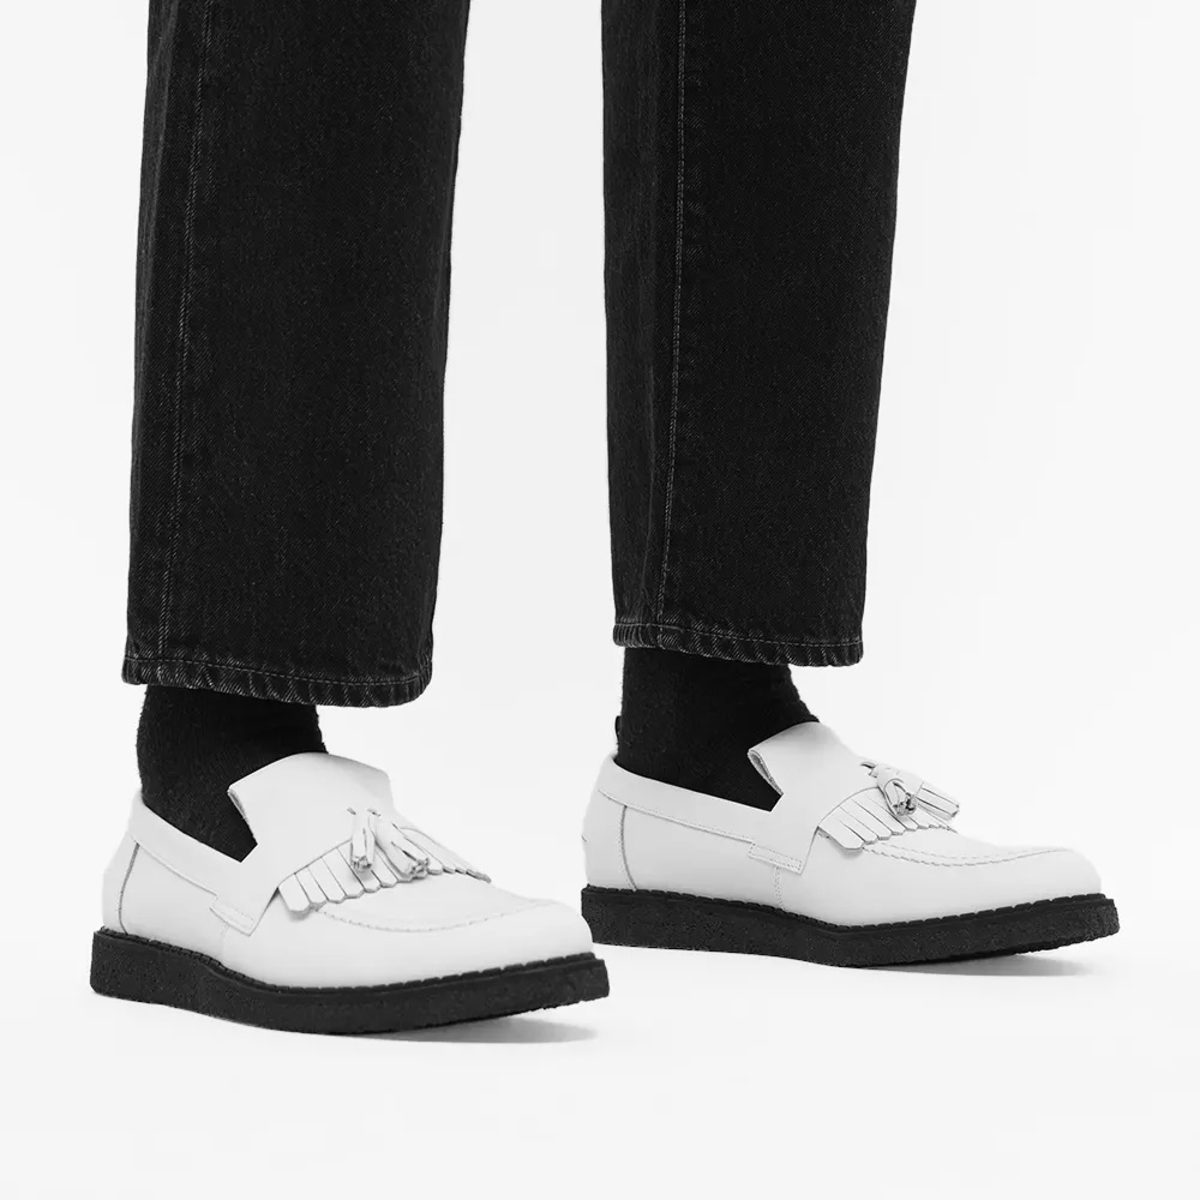 Fred Perry x George Cox Debut Premium Tassel Loafer Collab - Airows